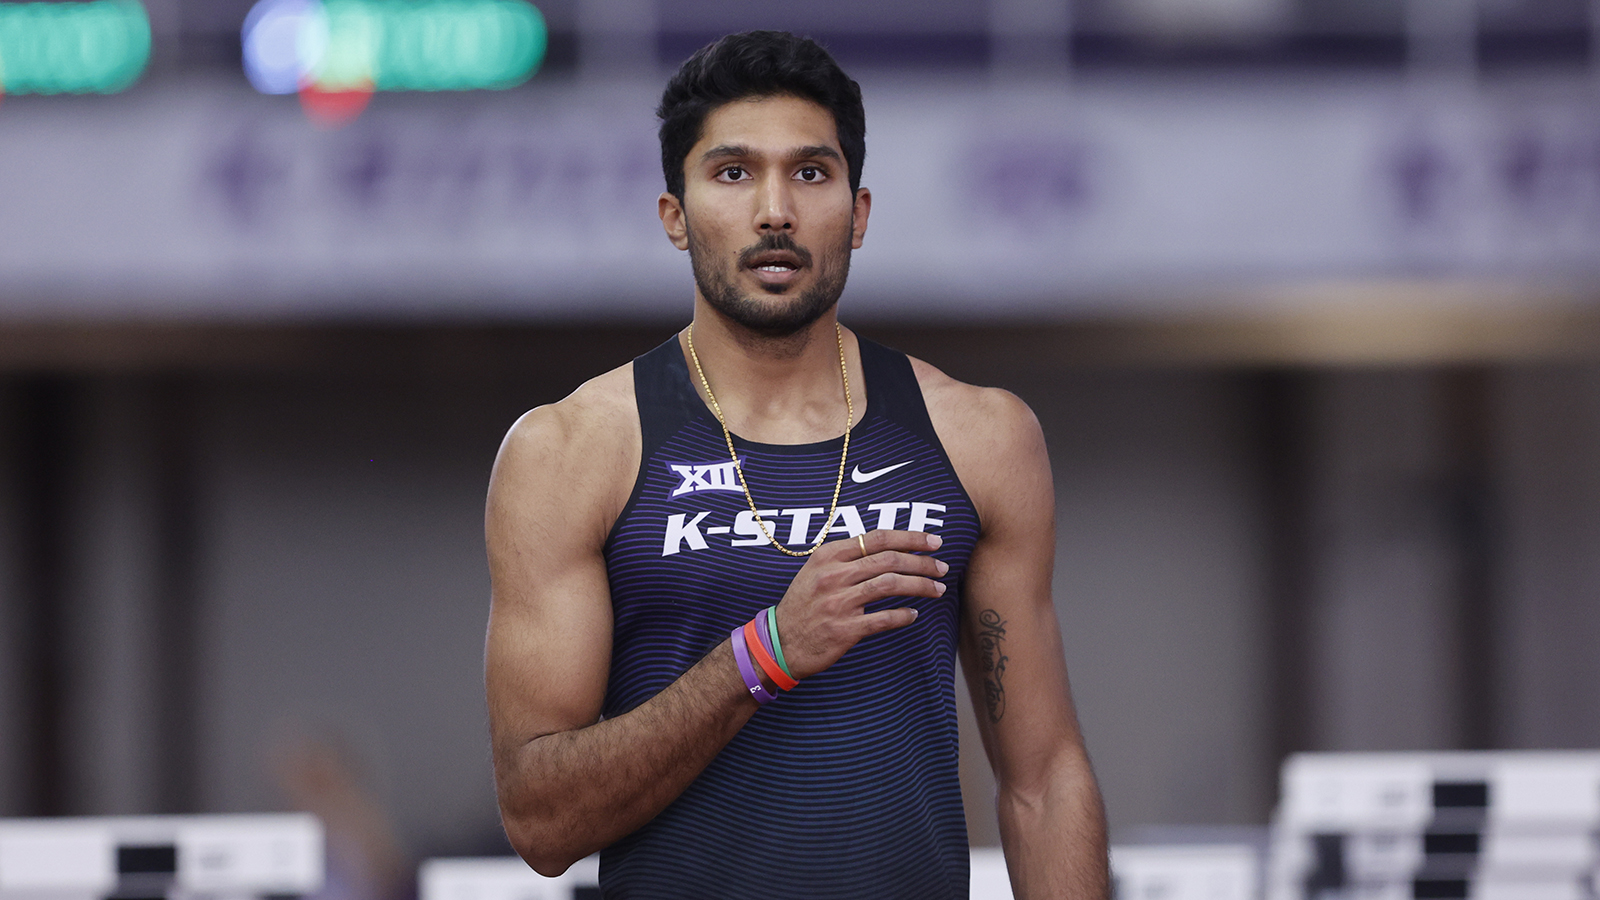 Commonwealth Games 2022: Delhi High Court SLAMS AFI to rule in favour of medal prospect Tejaswin Shankar, says “there should be no ego problem”